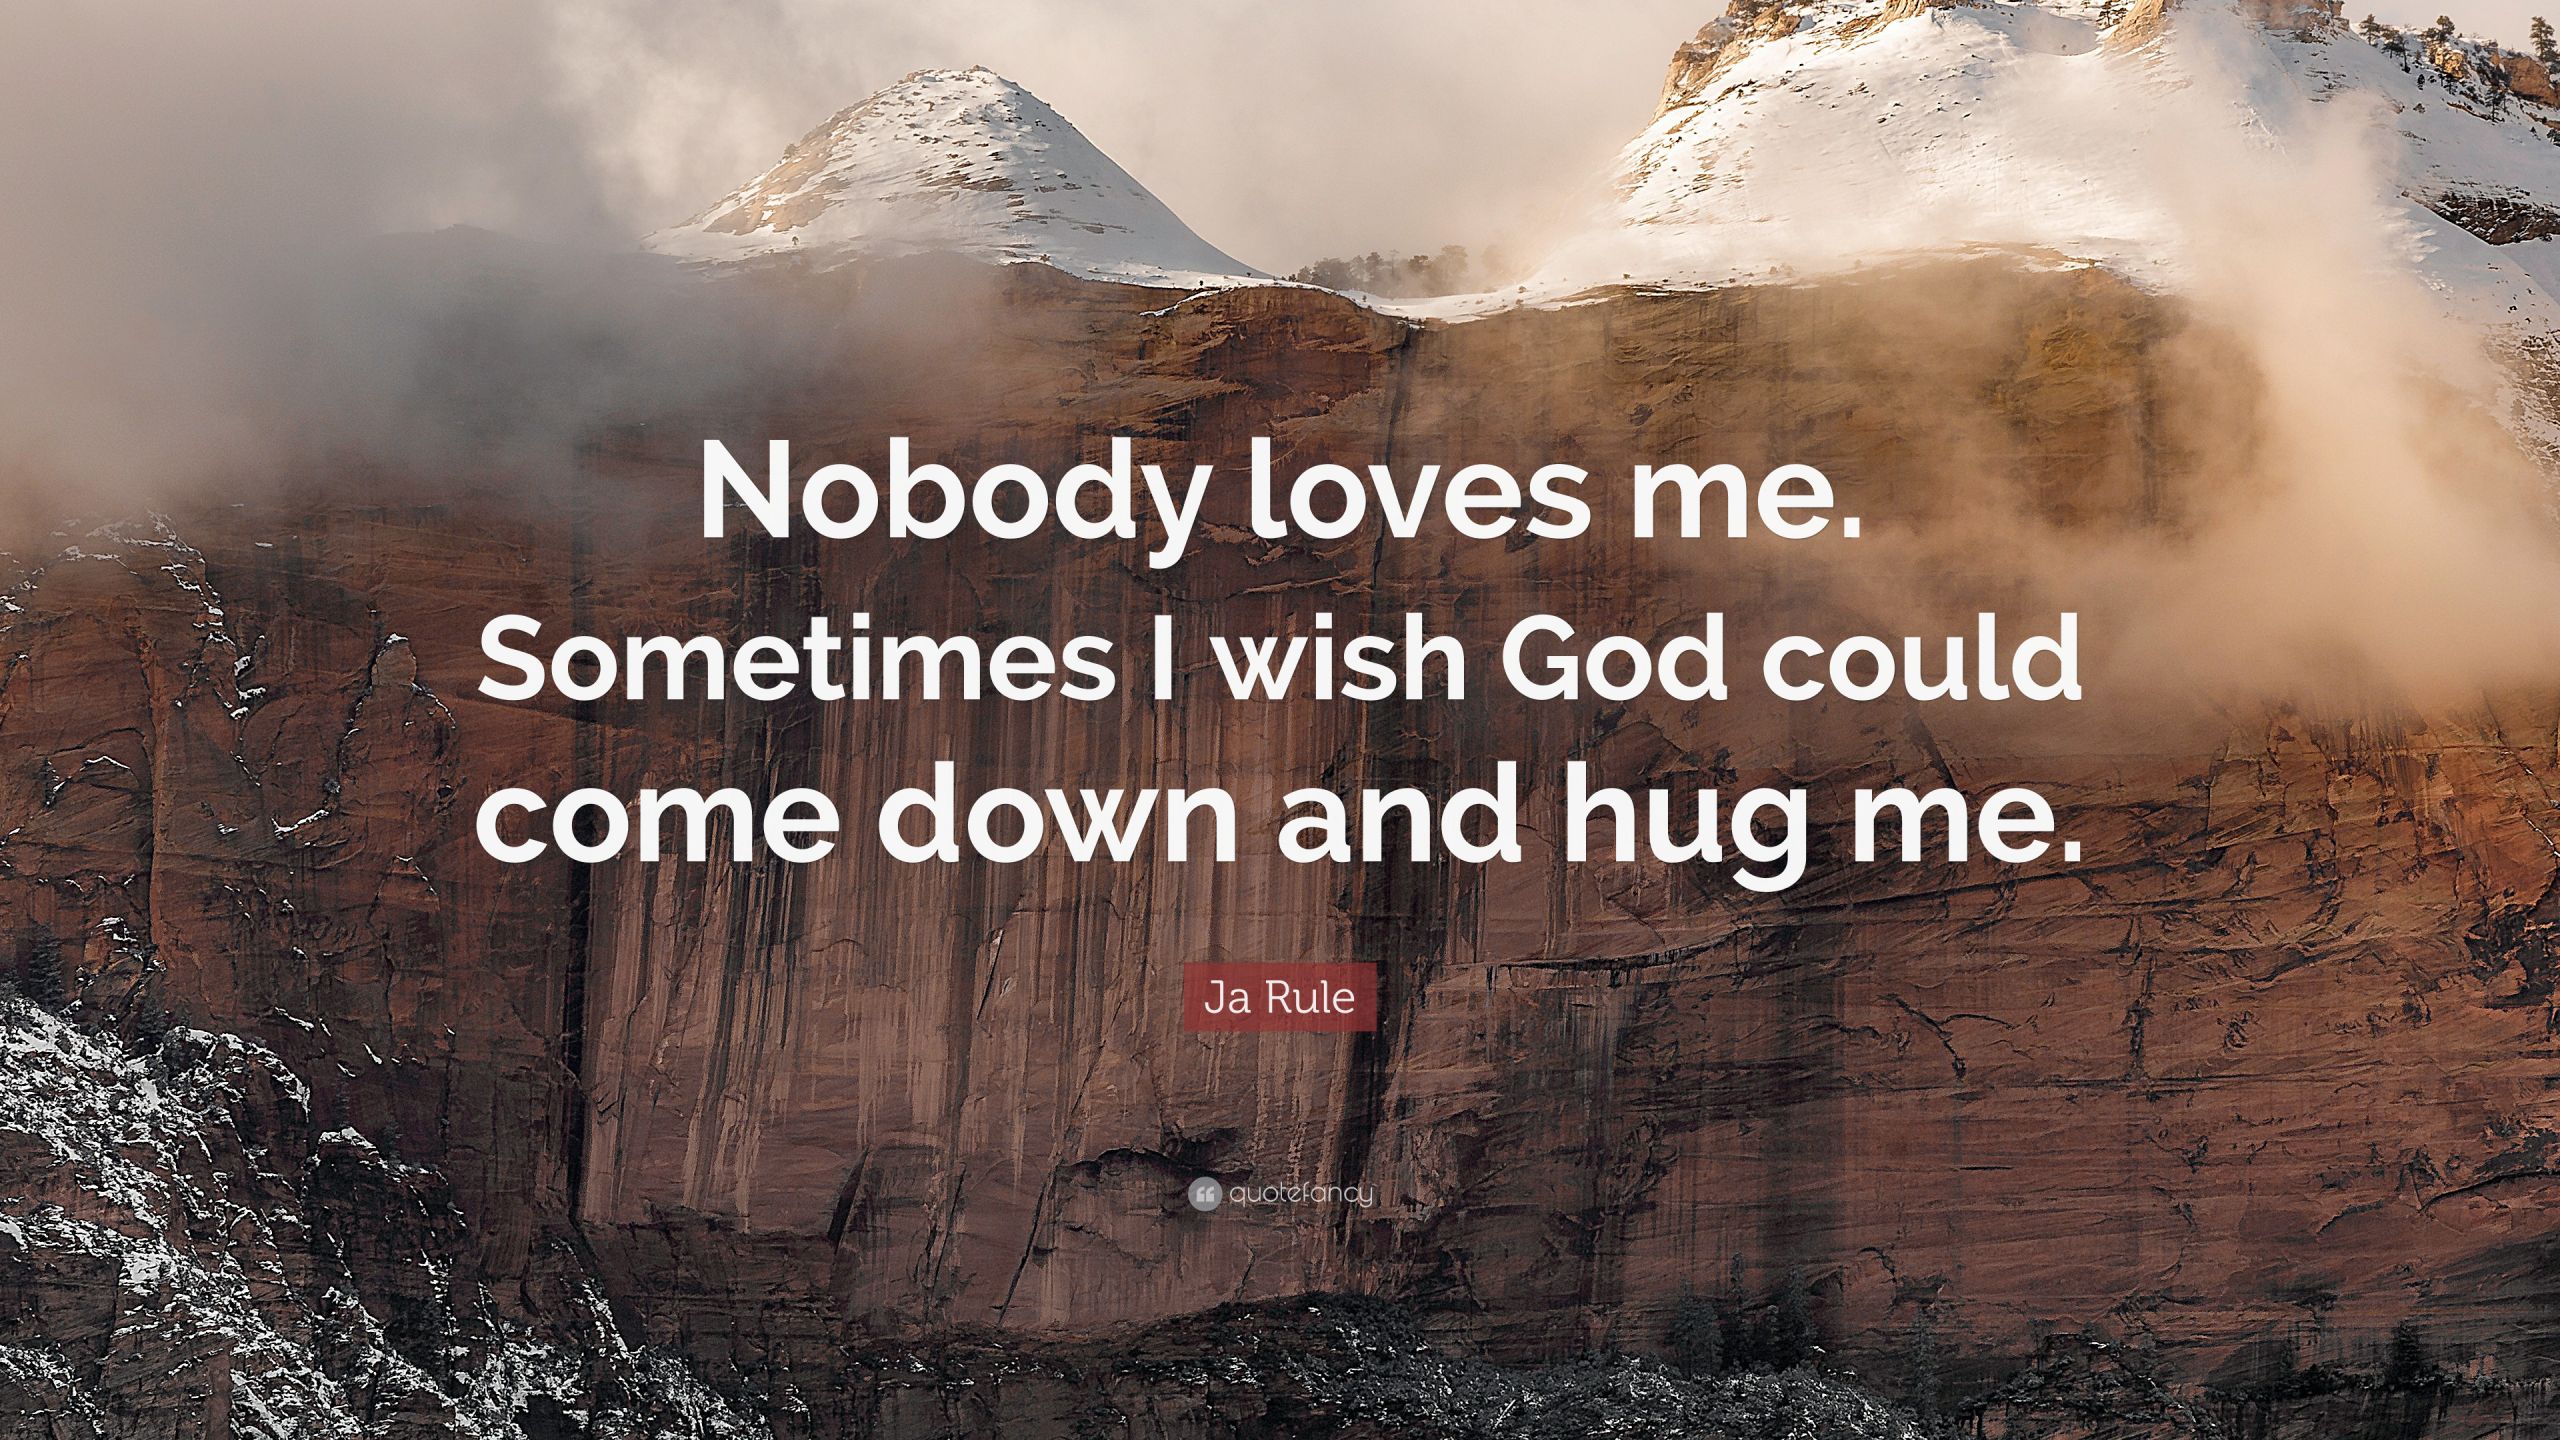 Nobody Loves Me Quotes
 Ja Rule Quote “Nobody loves me Sometimes I wish God